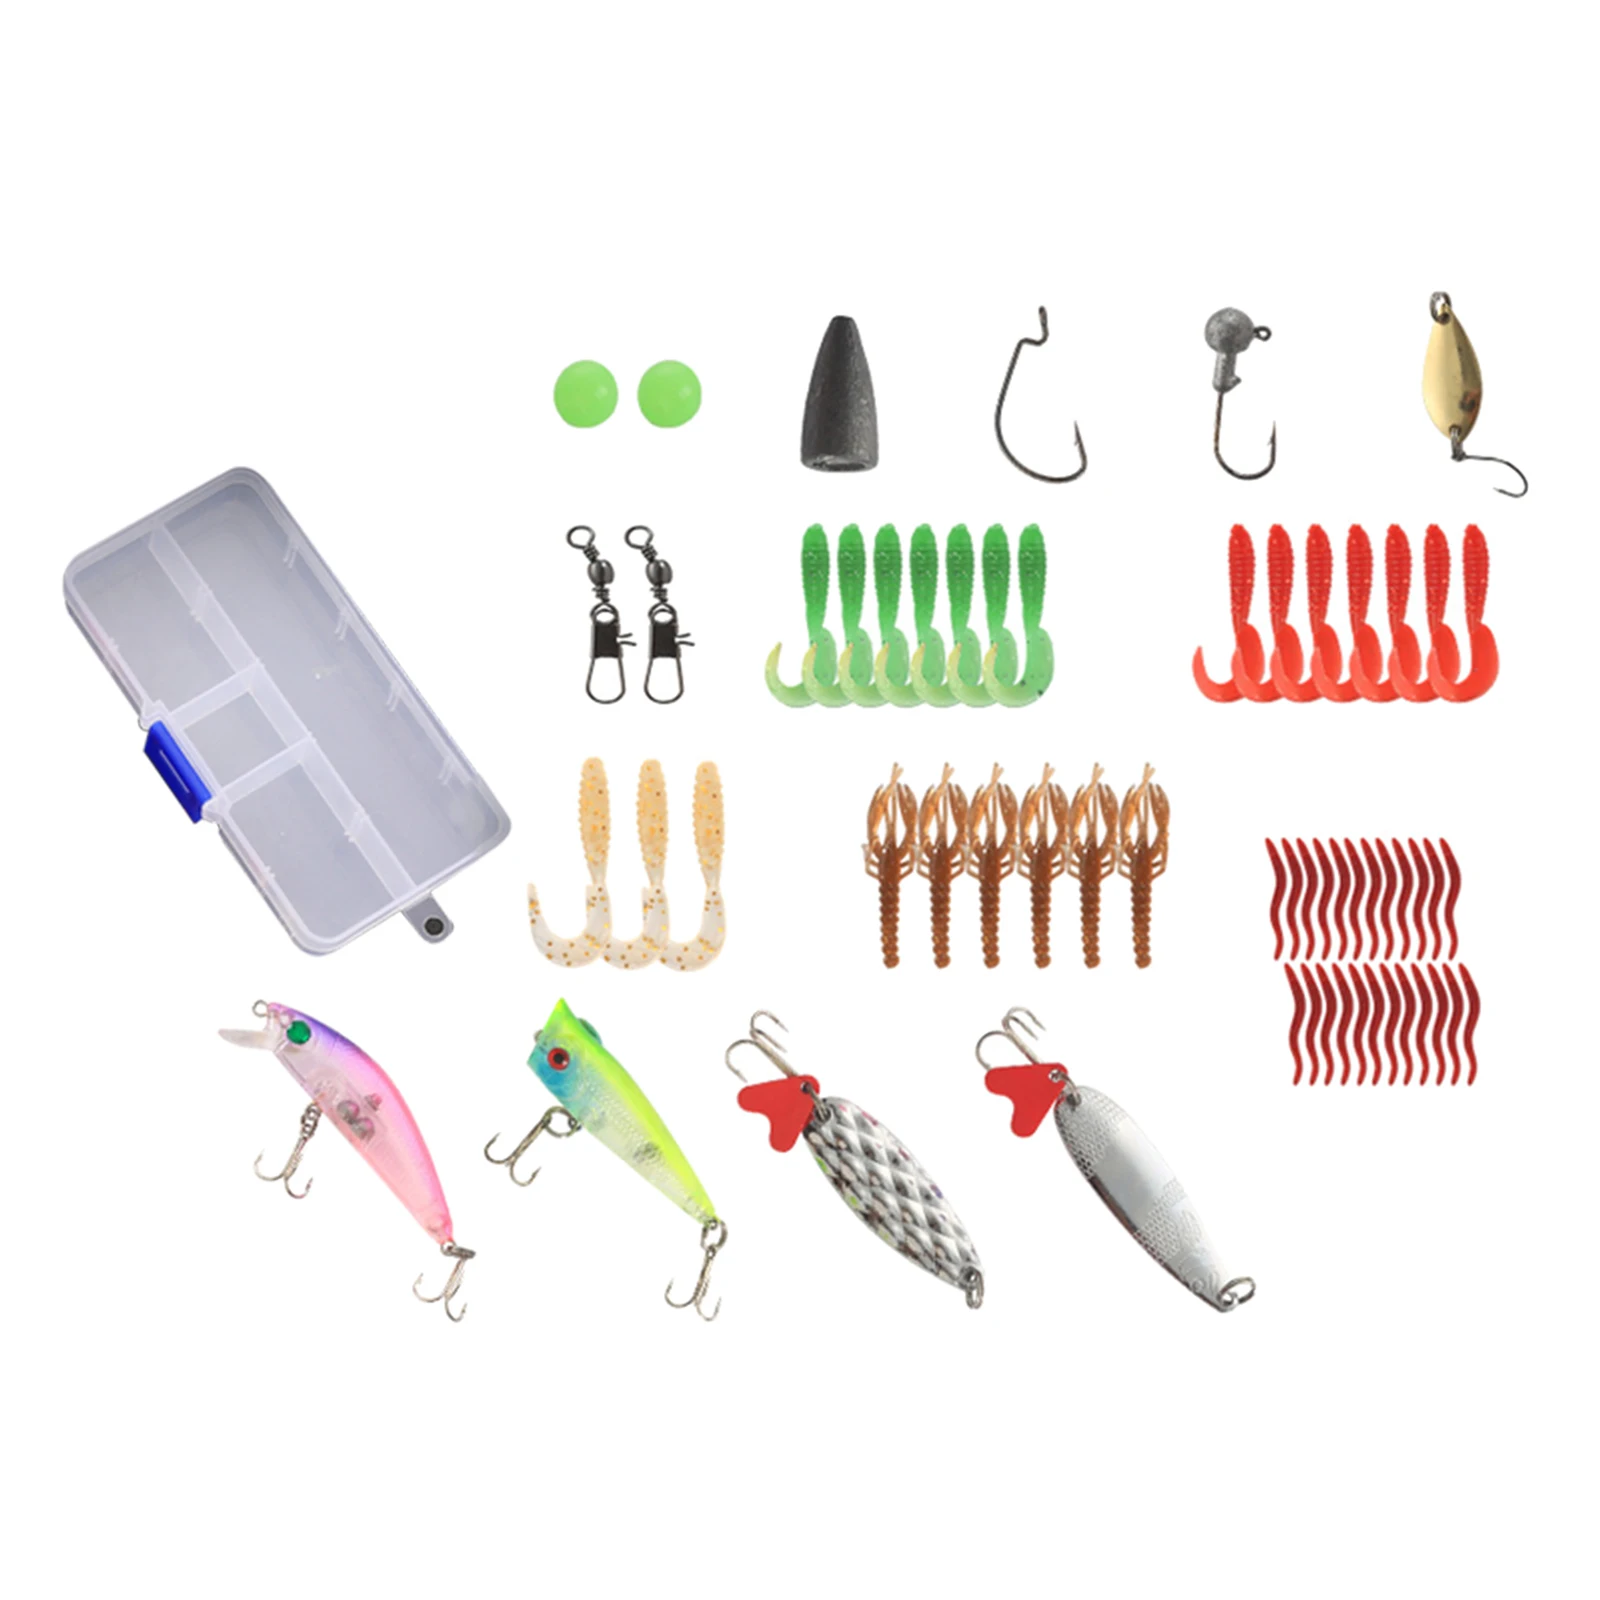 59Pcs Fishing Tackle Set, Portable Bass Fishing Baits Kit with Free Tackle Box,for Freshwater Saltwater Trout Bass Salmon